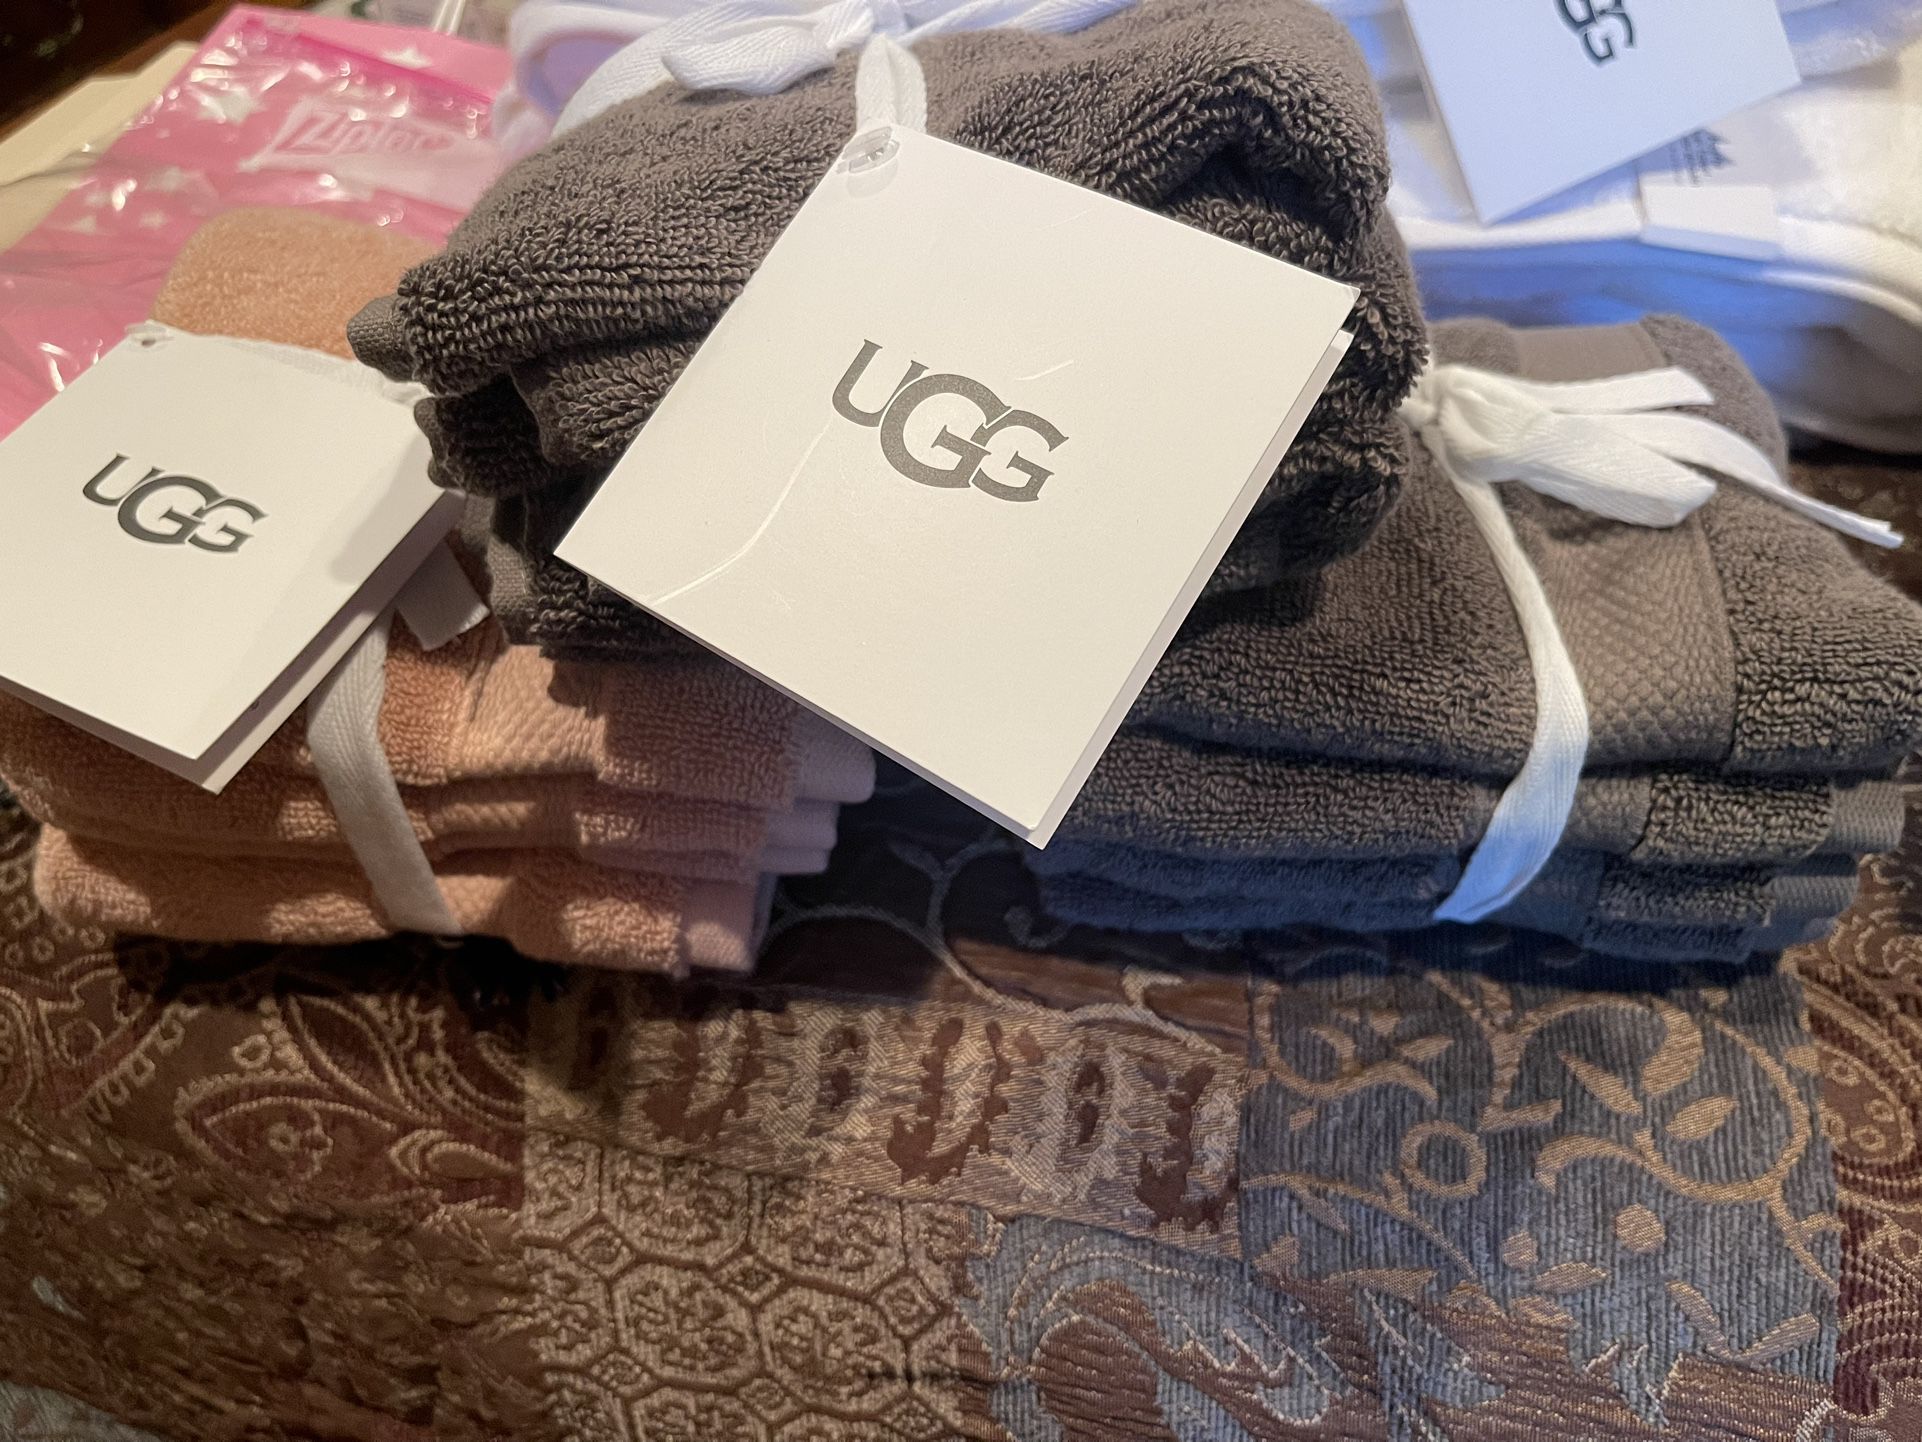 Ugg Soft Towels for Sale in Islip Terrace, NY - OfferUp